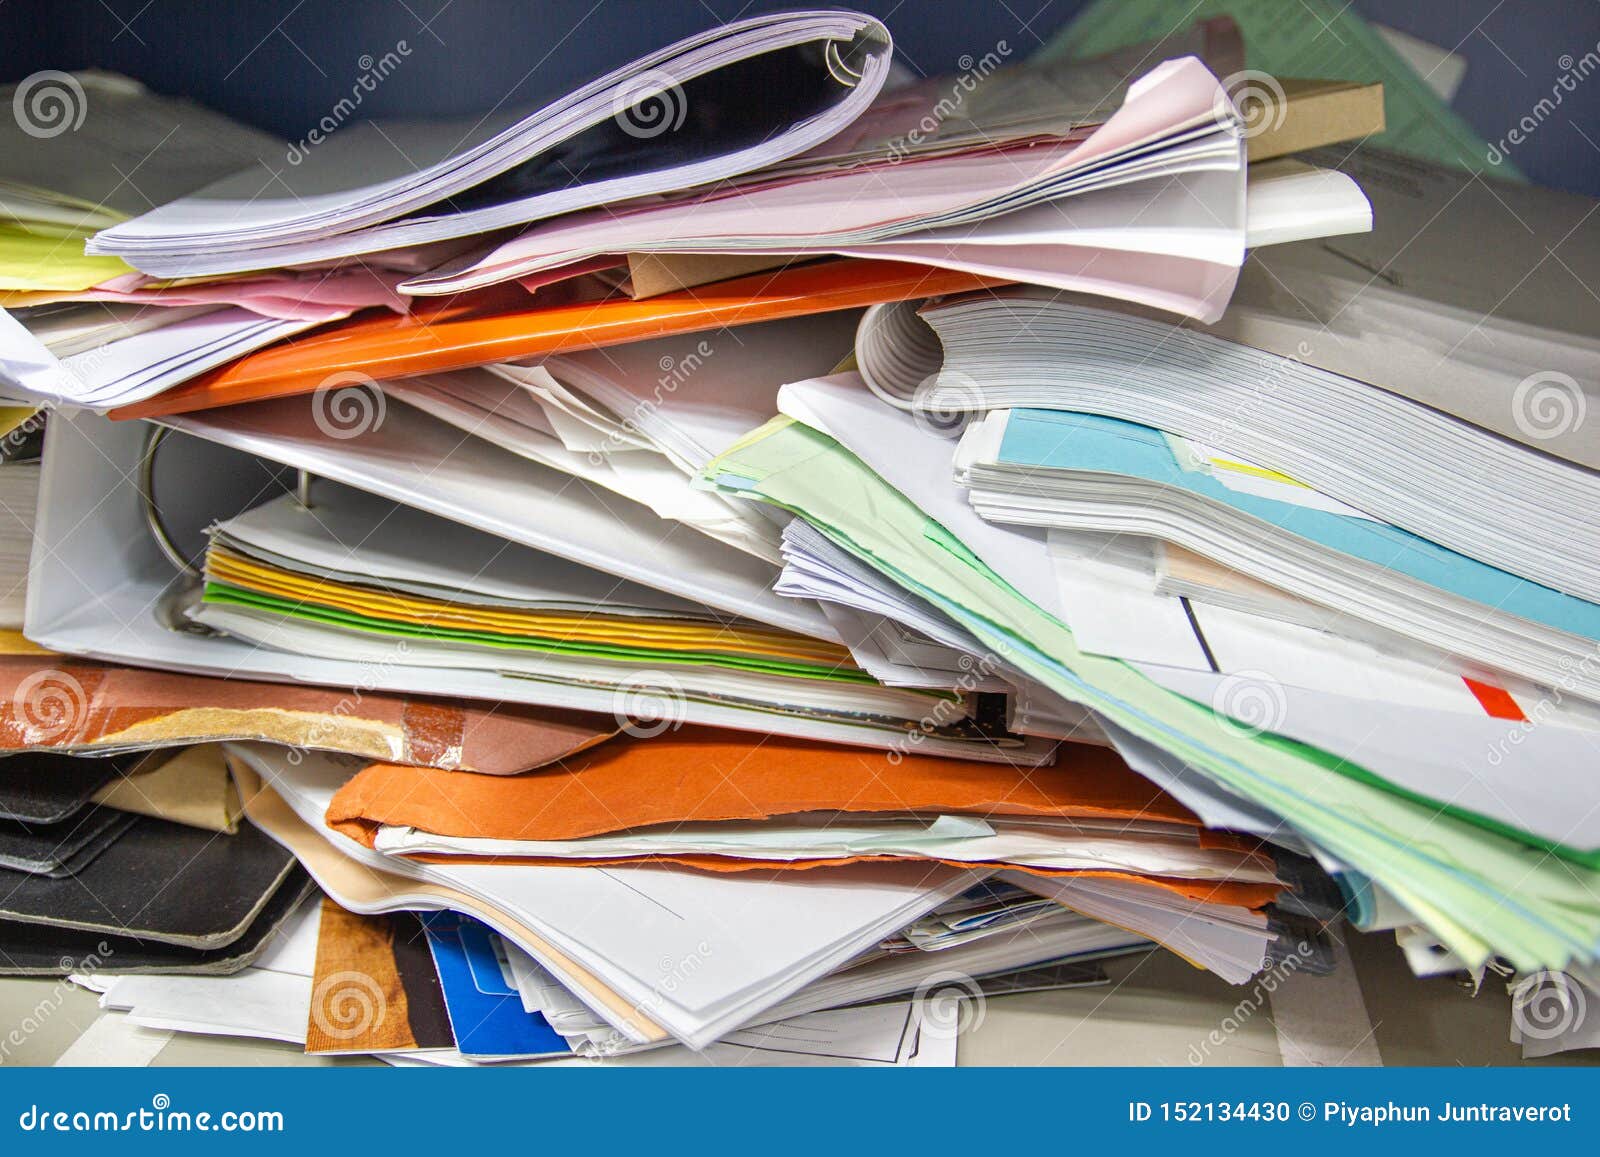 messy file document and office supplies in filing cabinets